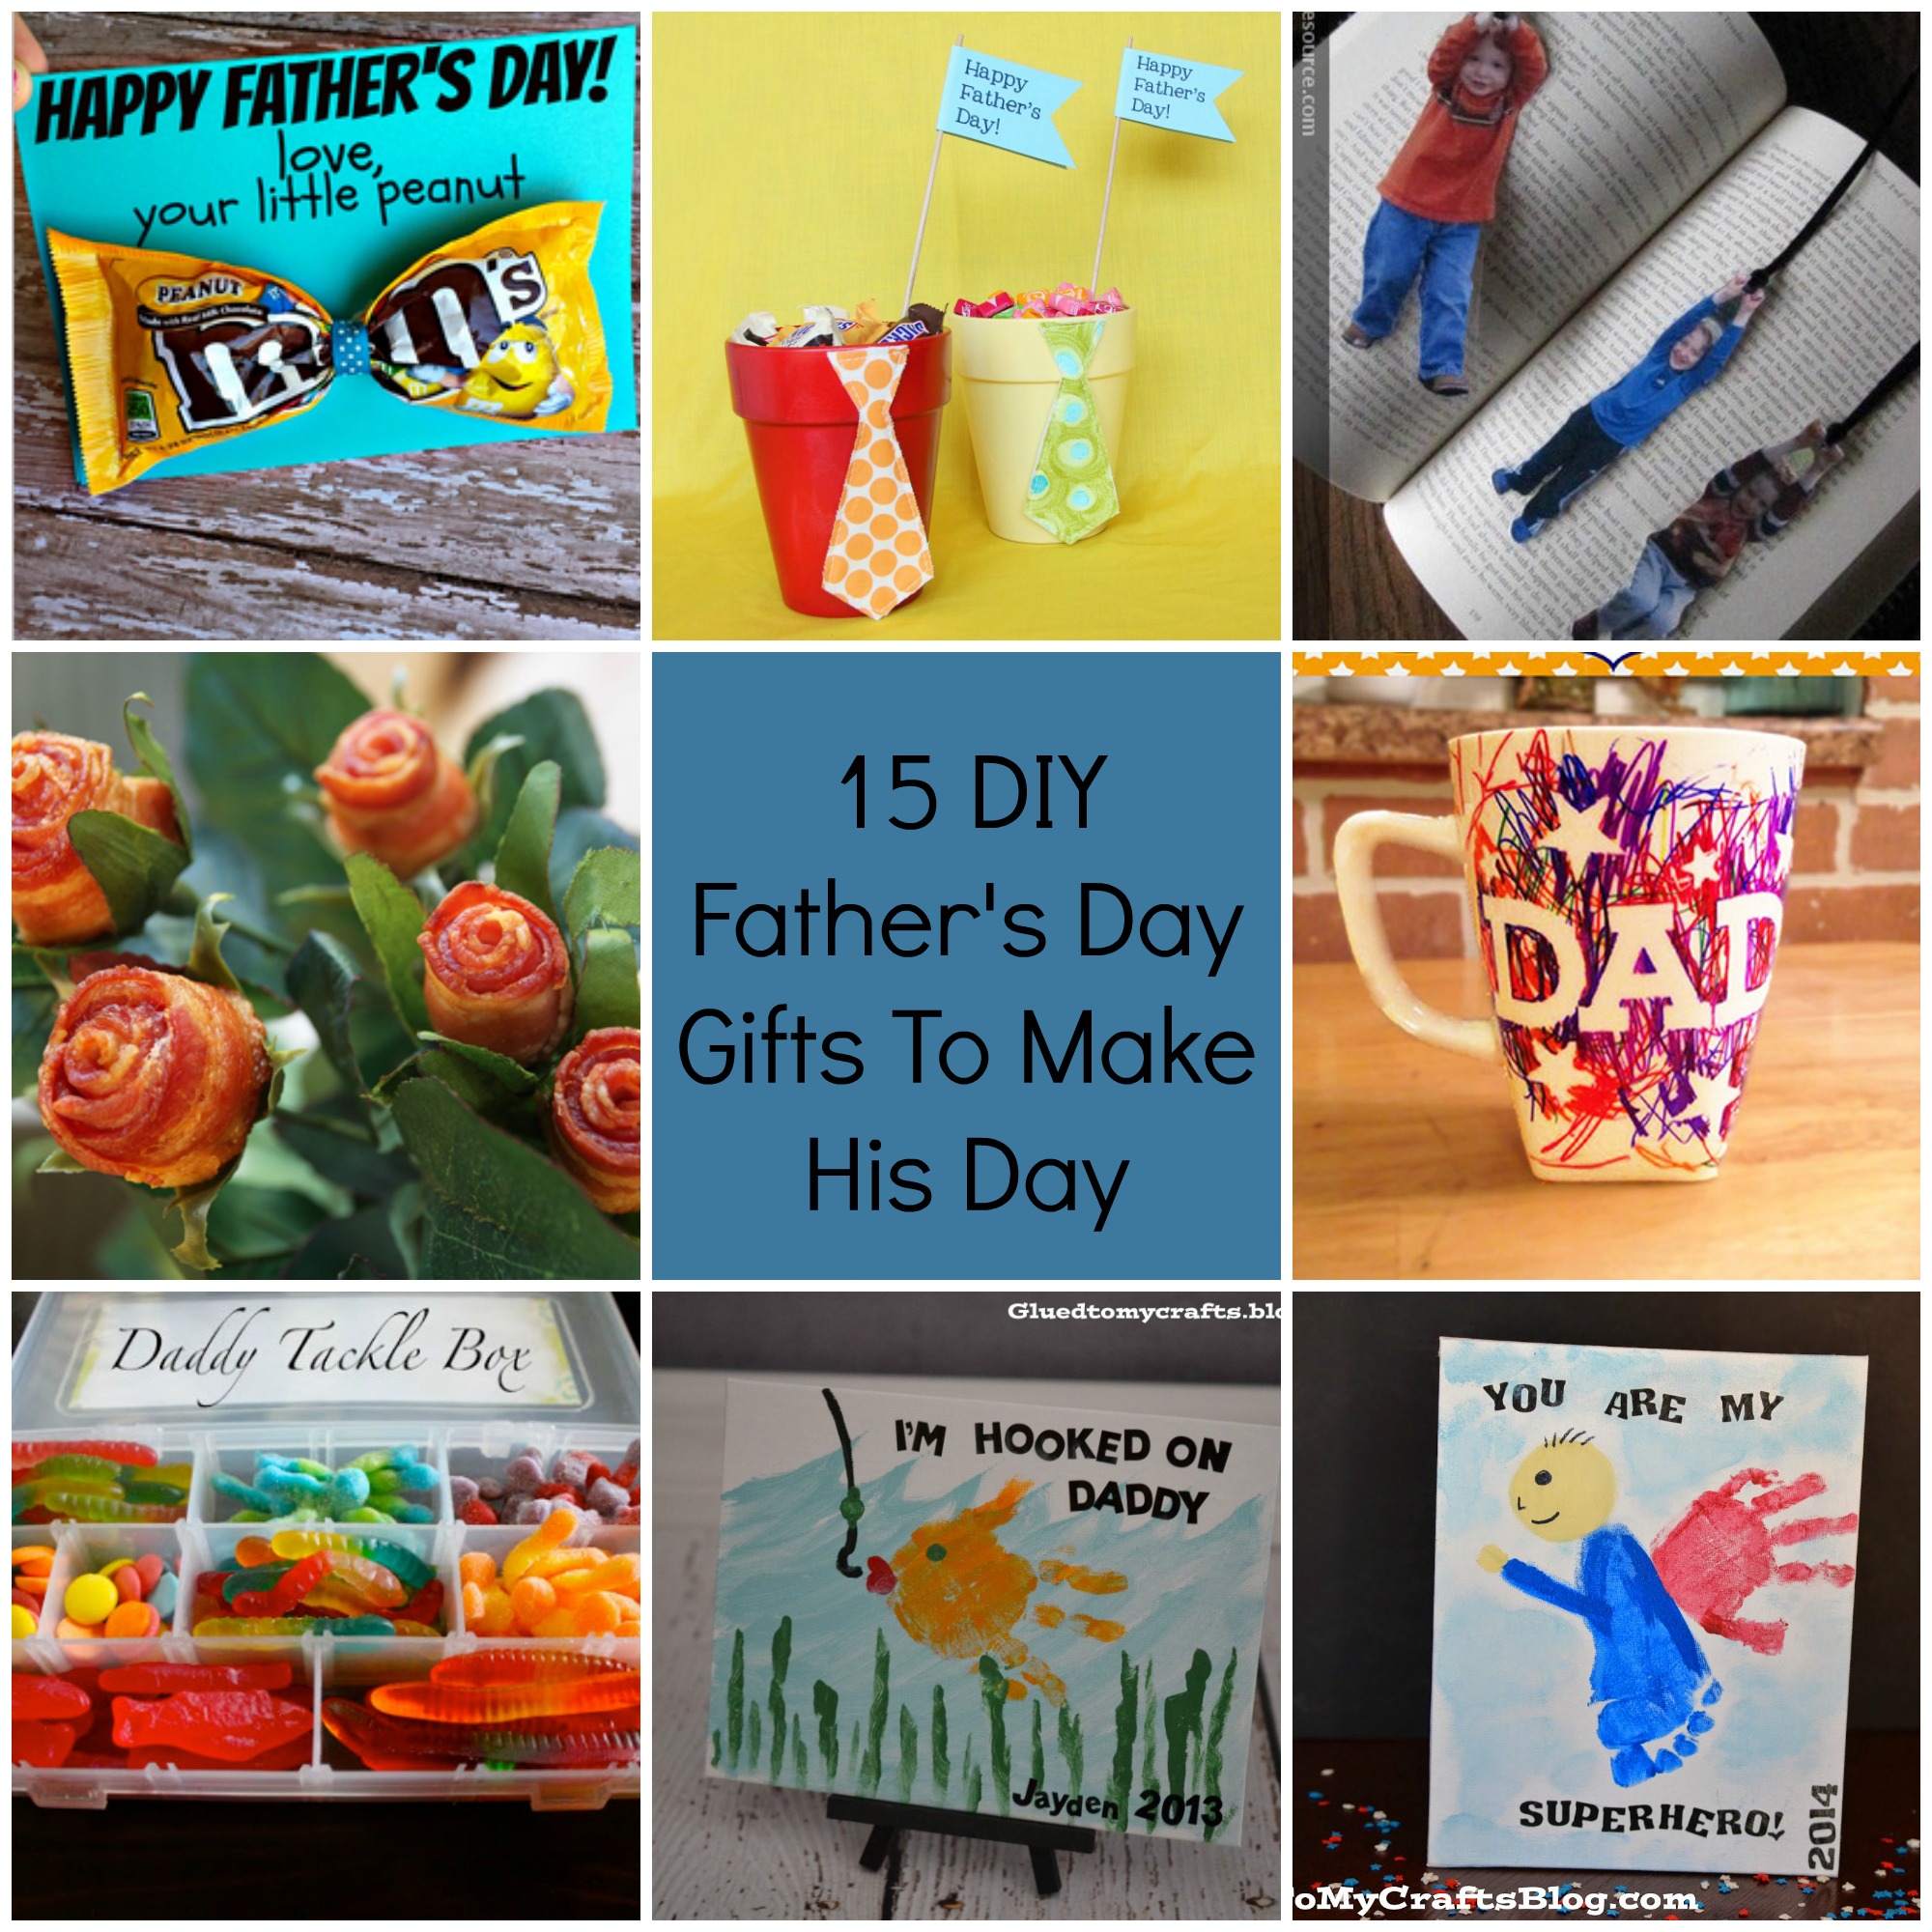 DIY Father's Day Gifts Father's Day gifts from kids that Dad will love